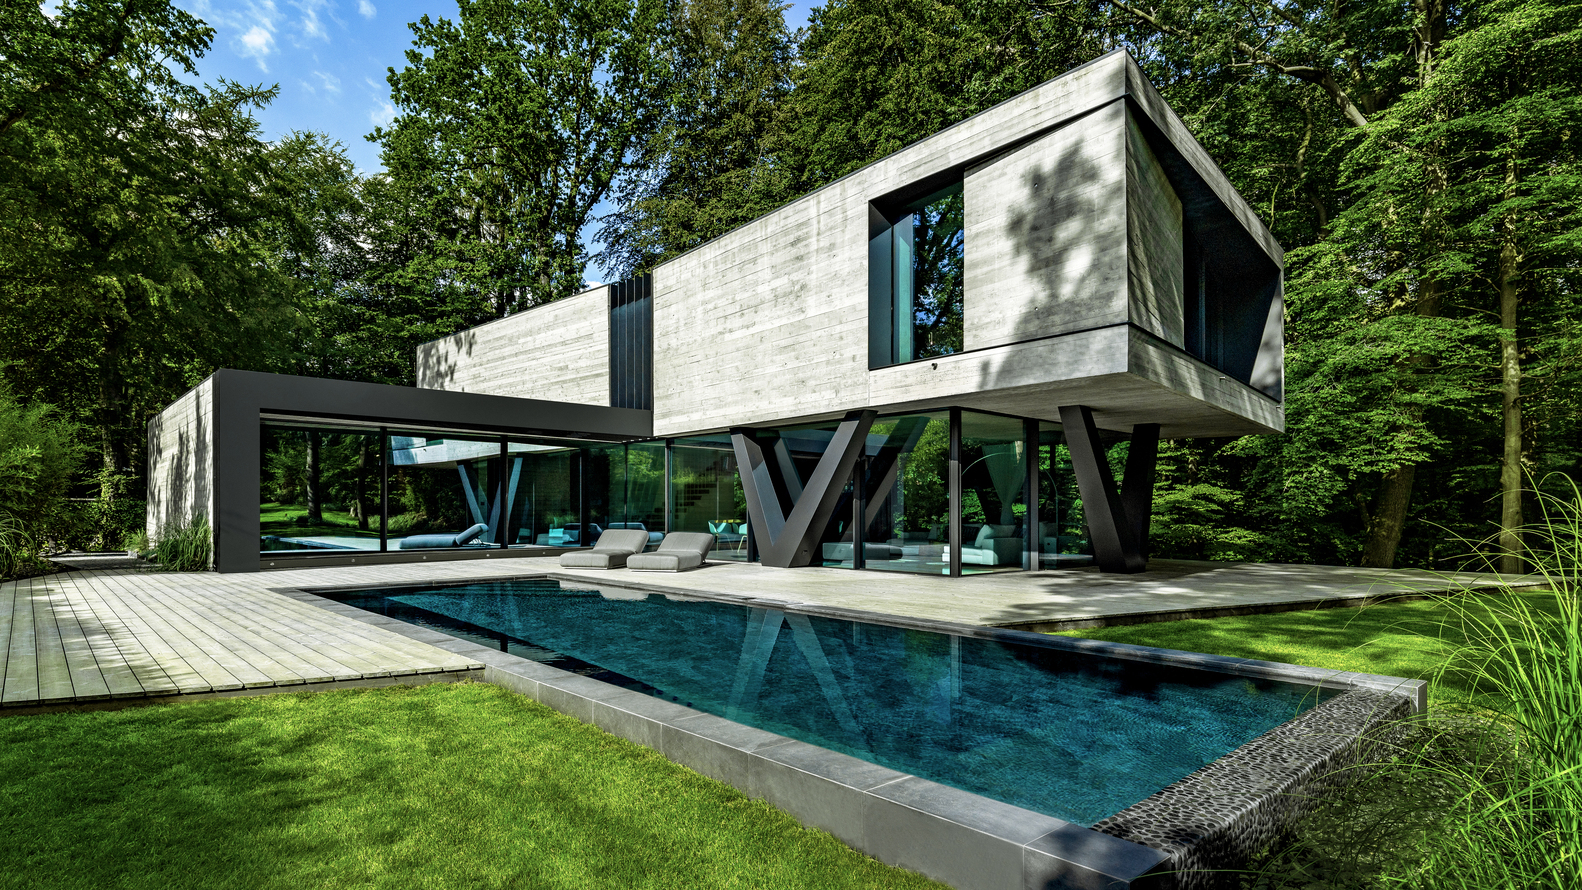 General 1582x890 house modern architecture swimming pool outdoors Germany